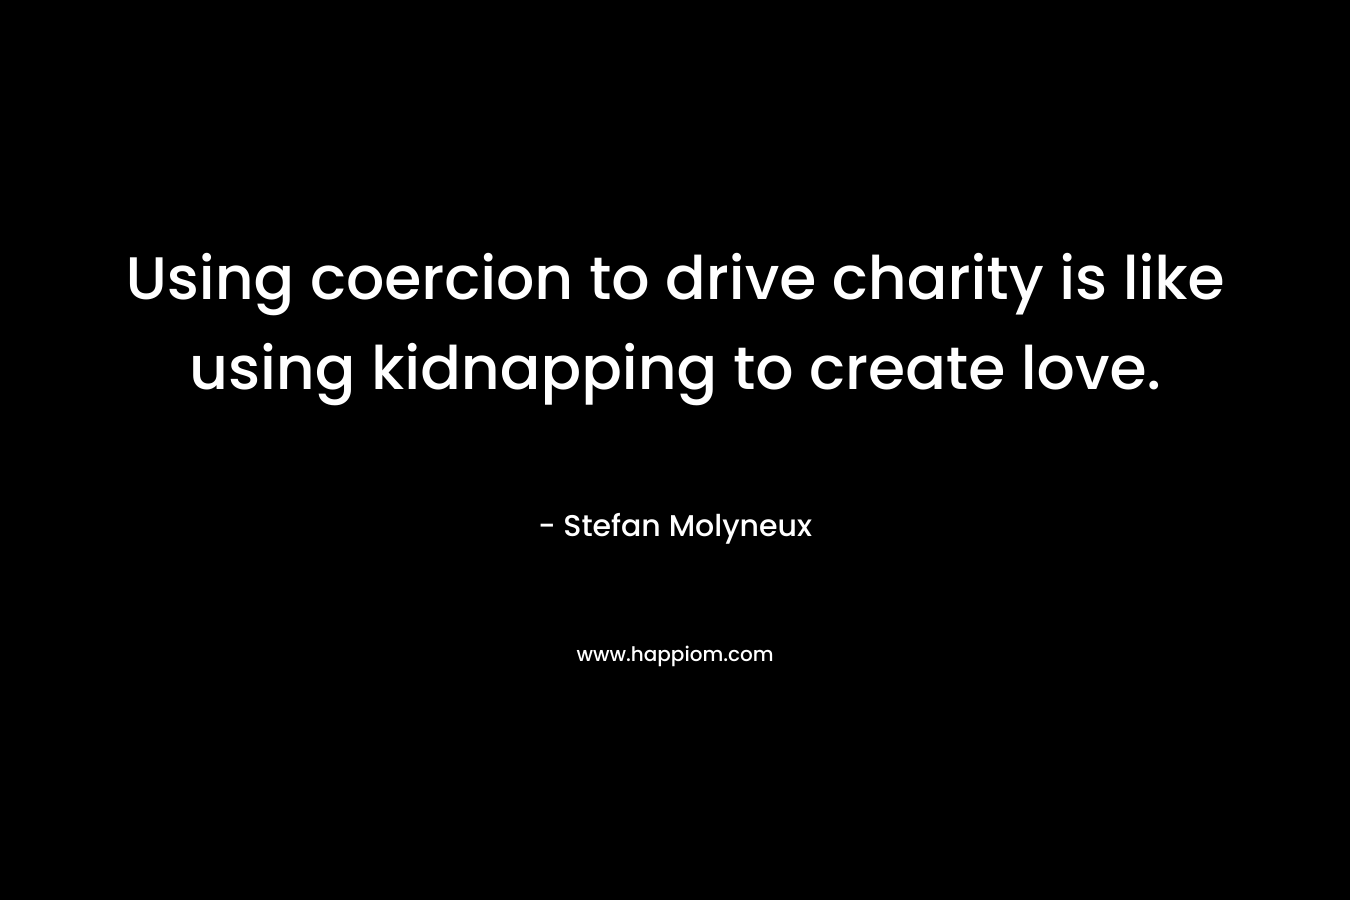 Using coercion to drive charity is like using kidnapping to create love.